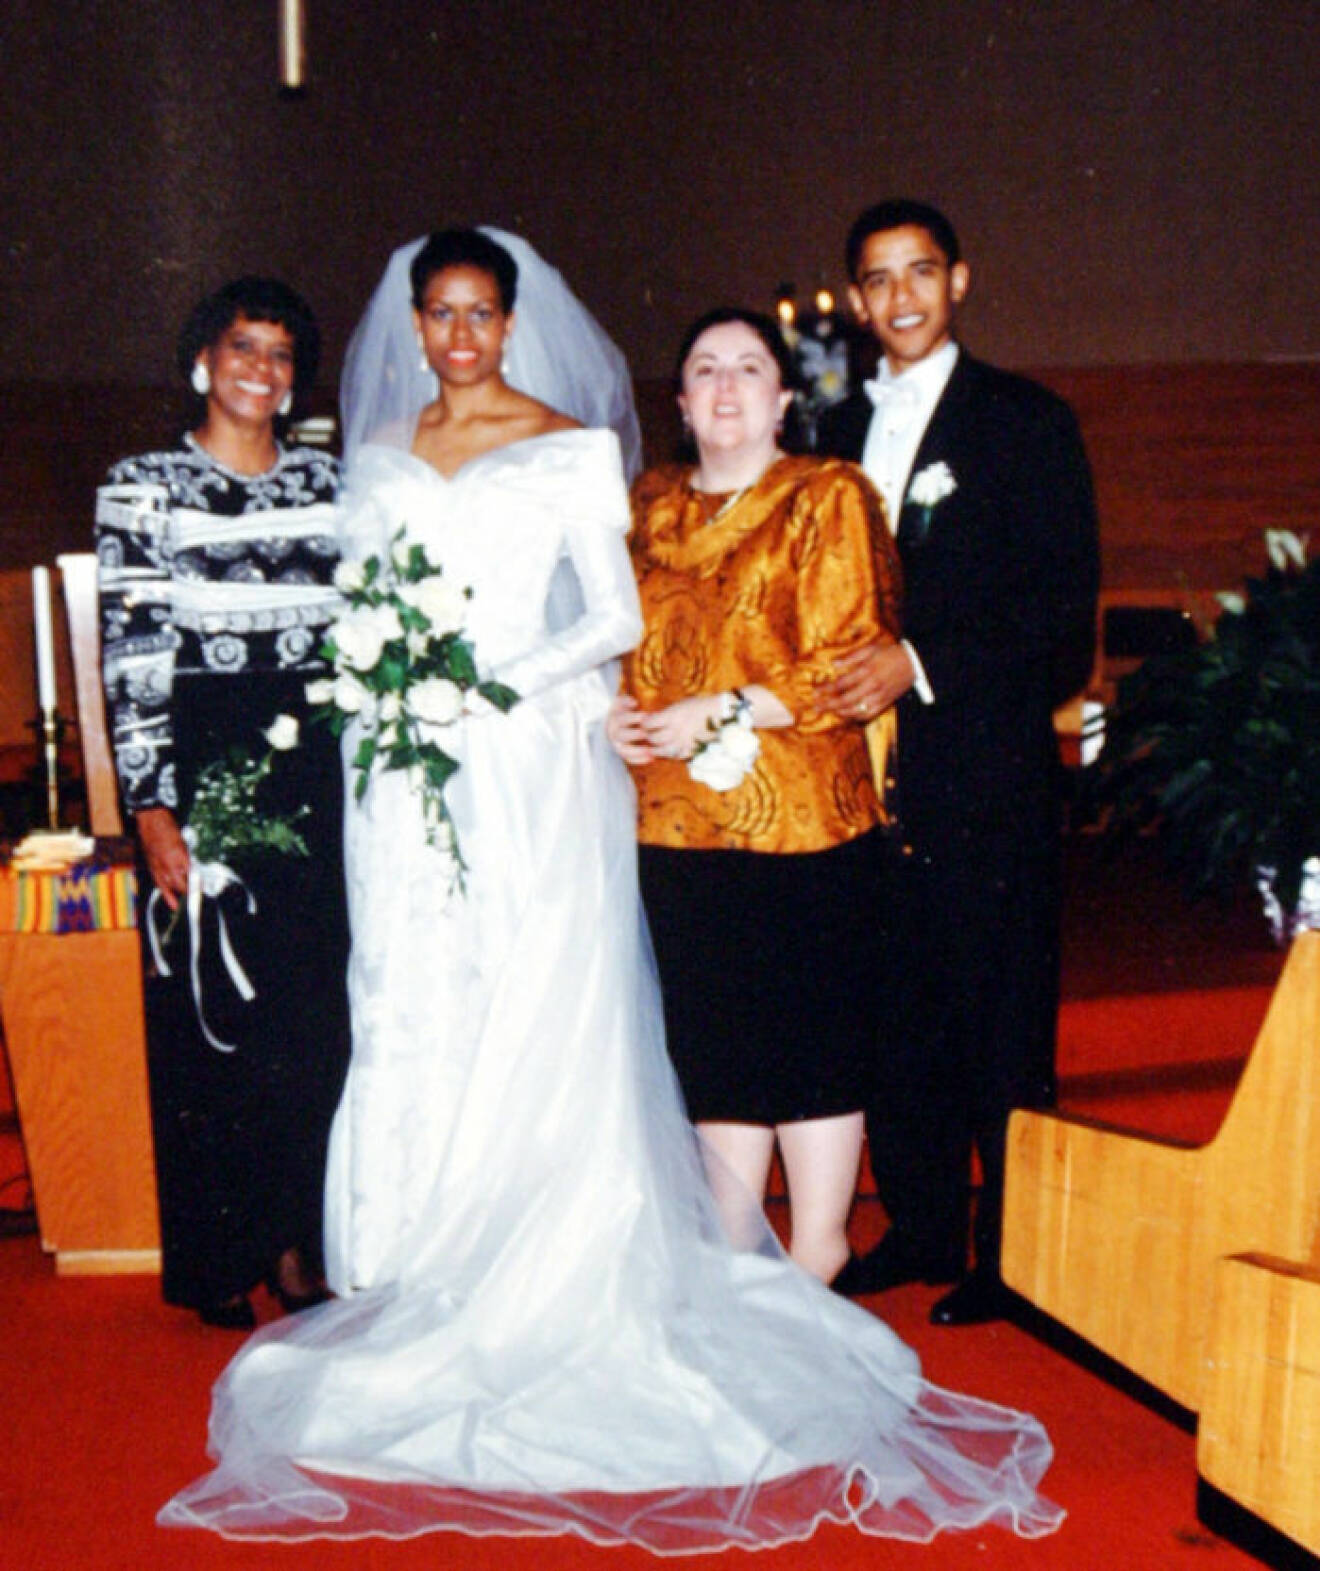 1992: Barack Obama and his wife Michelle Robinson Obama on their wedding day with Marian Robinson (L) and his mother Ann Dunham (second from right). Barack Hussein Obama (born August 4, 1961) is the junior U.S. Senator from Illinois. In November 2004, he was elected to the Senate as a Democrat. He is married to Michelle Obama and is a father to two daughters. On January 3, 2008 he came first in the Iowa caucus for the American presidency. (OfA/Polaris) /// Barack Obama and his wife Michelle Robinson Obama on their wedding day with Marian Robinson (L) and his mother Ann Dunham (second from right)